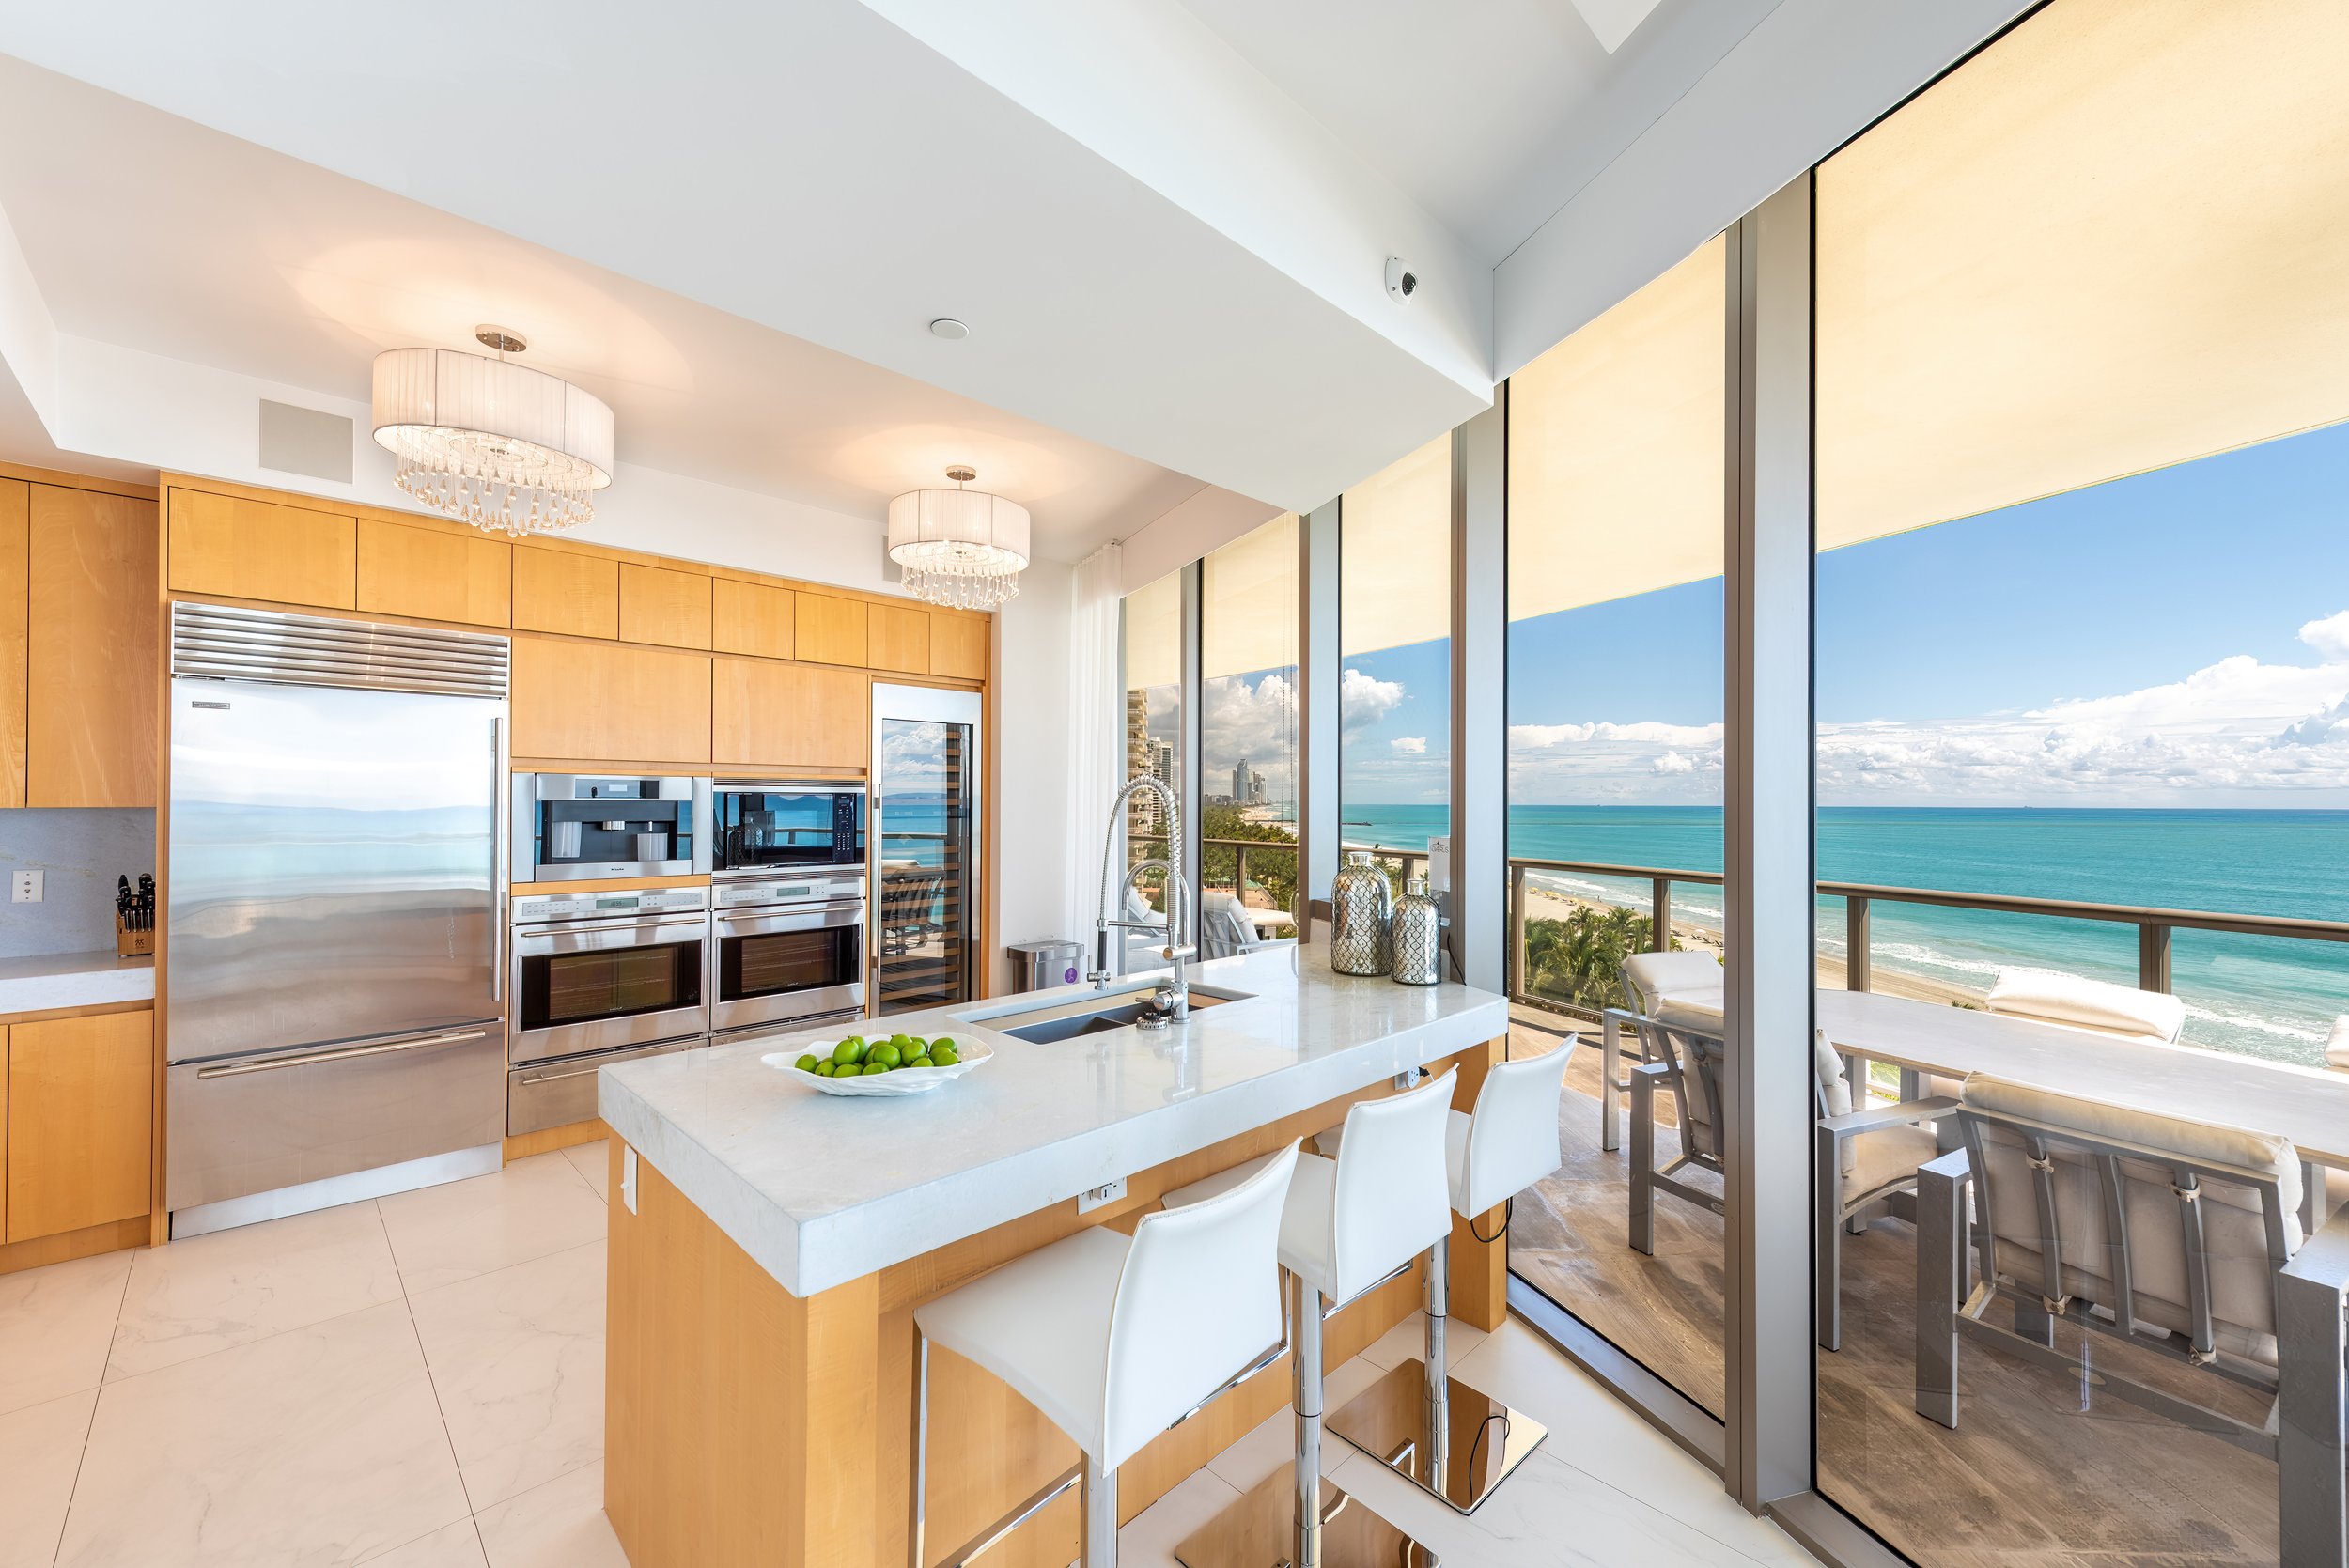 Master Brokers Forum Listing: See The Views From This Beachfront Condo In St. Regis Bal Harbour Asking $10.995 Million 14.JPG